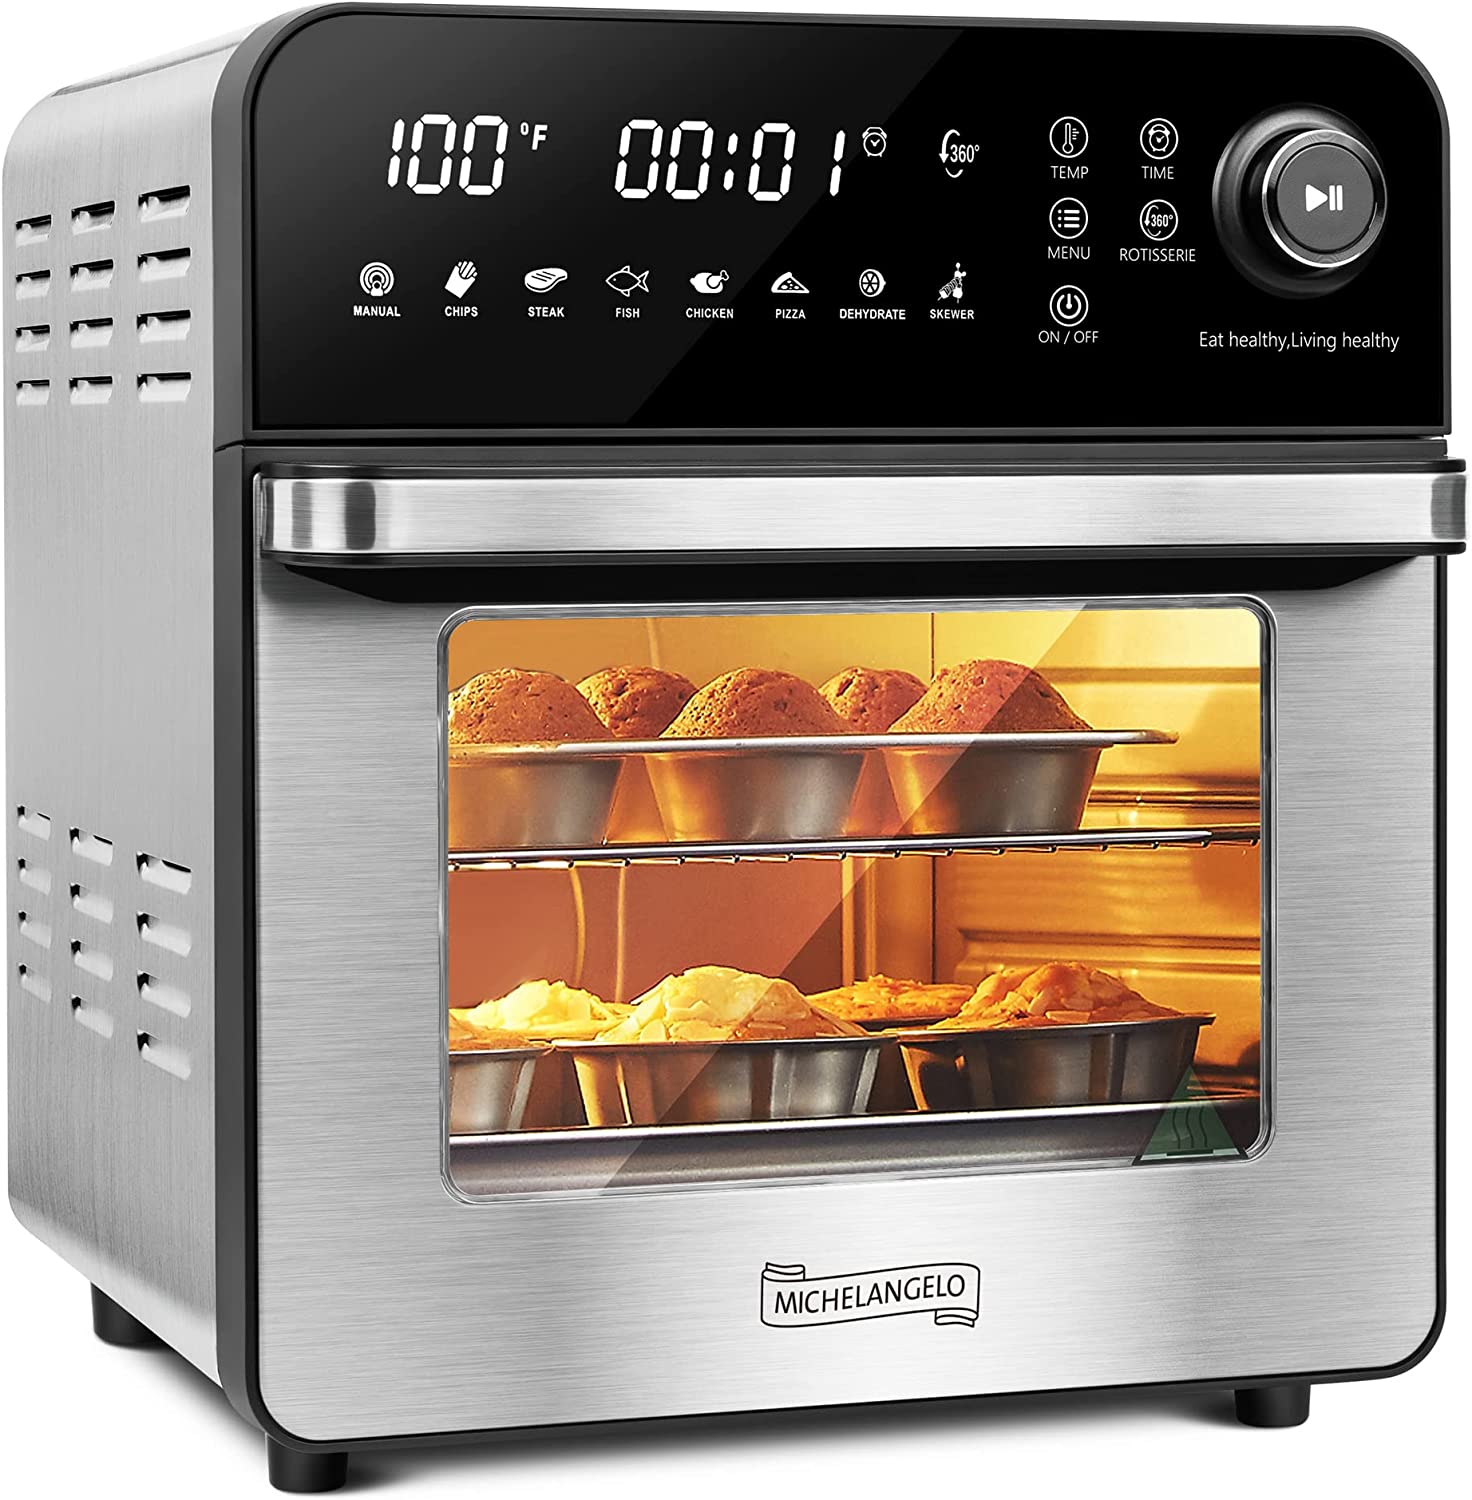 MICHELANGELO Air Fryer Toaster Oven Combo 16 Quart -  - 7-in-1 Stainless Steel Air Fryer Oven with Rotisserie